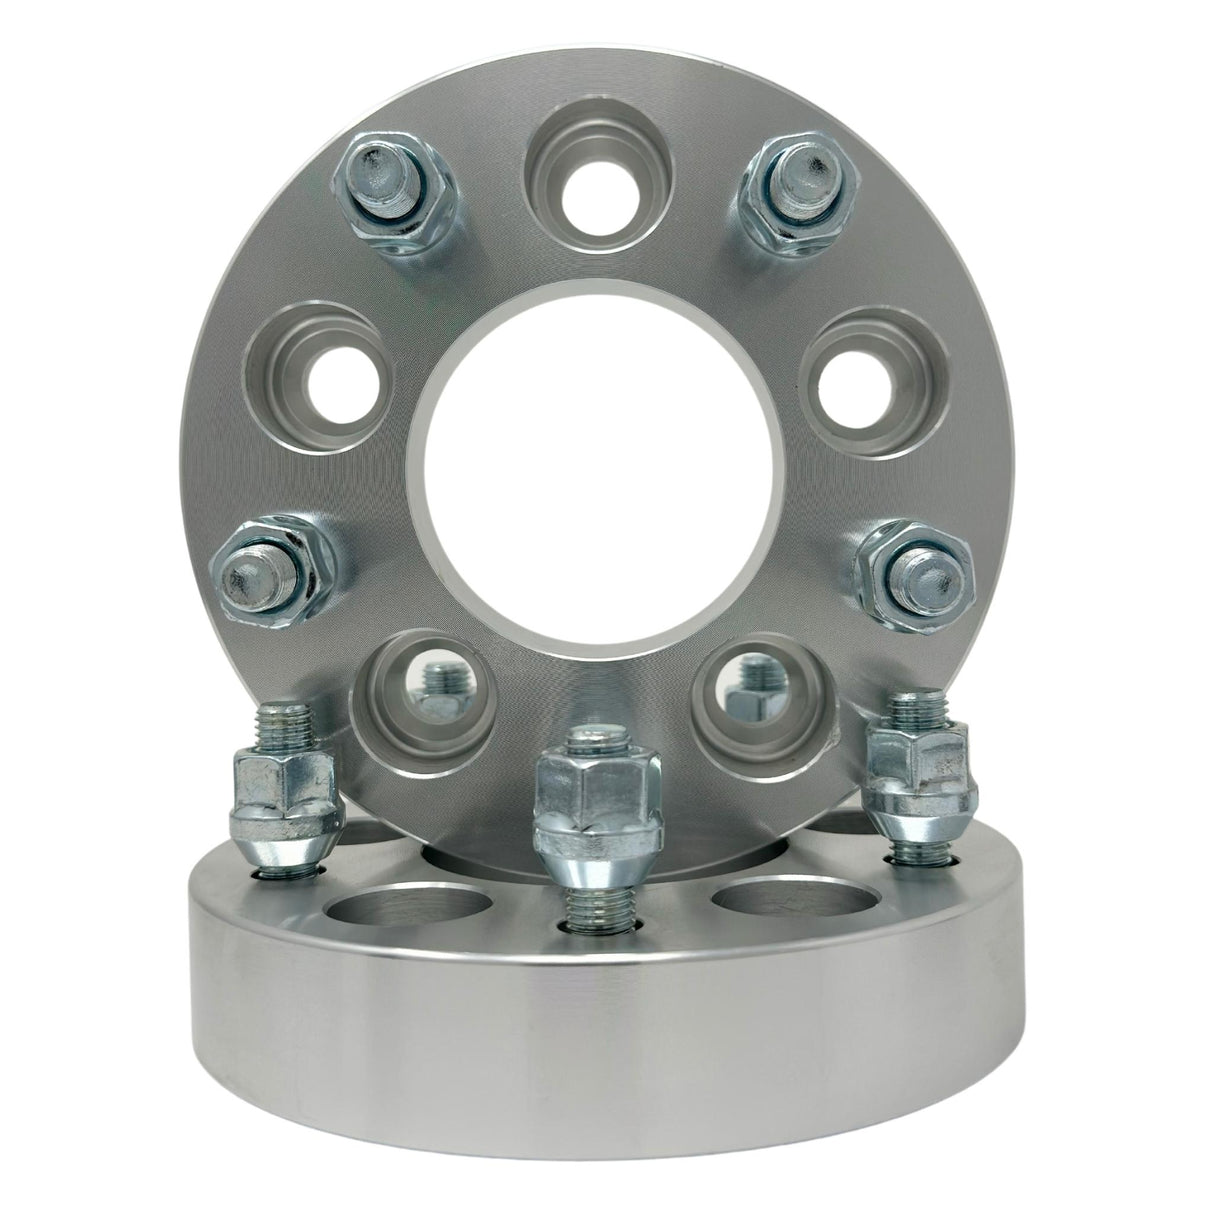 5x4.25 (5x108) Wheel Spacers 1" Inch (25mm) 12x1.5 Studs & Lug Nuts 74mm Center Bore